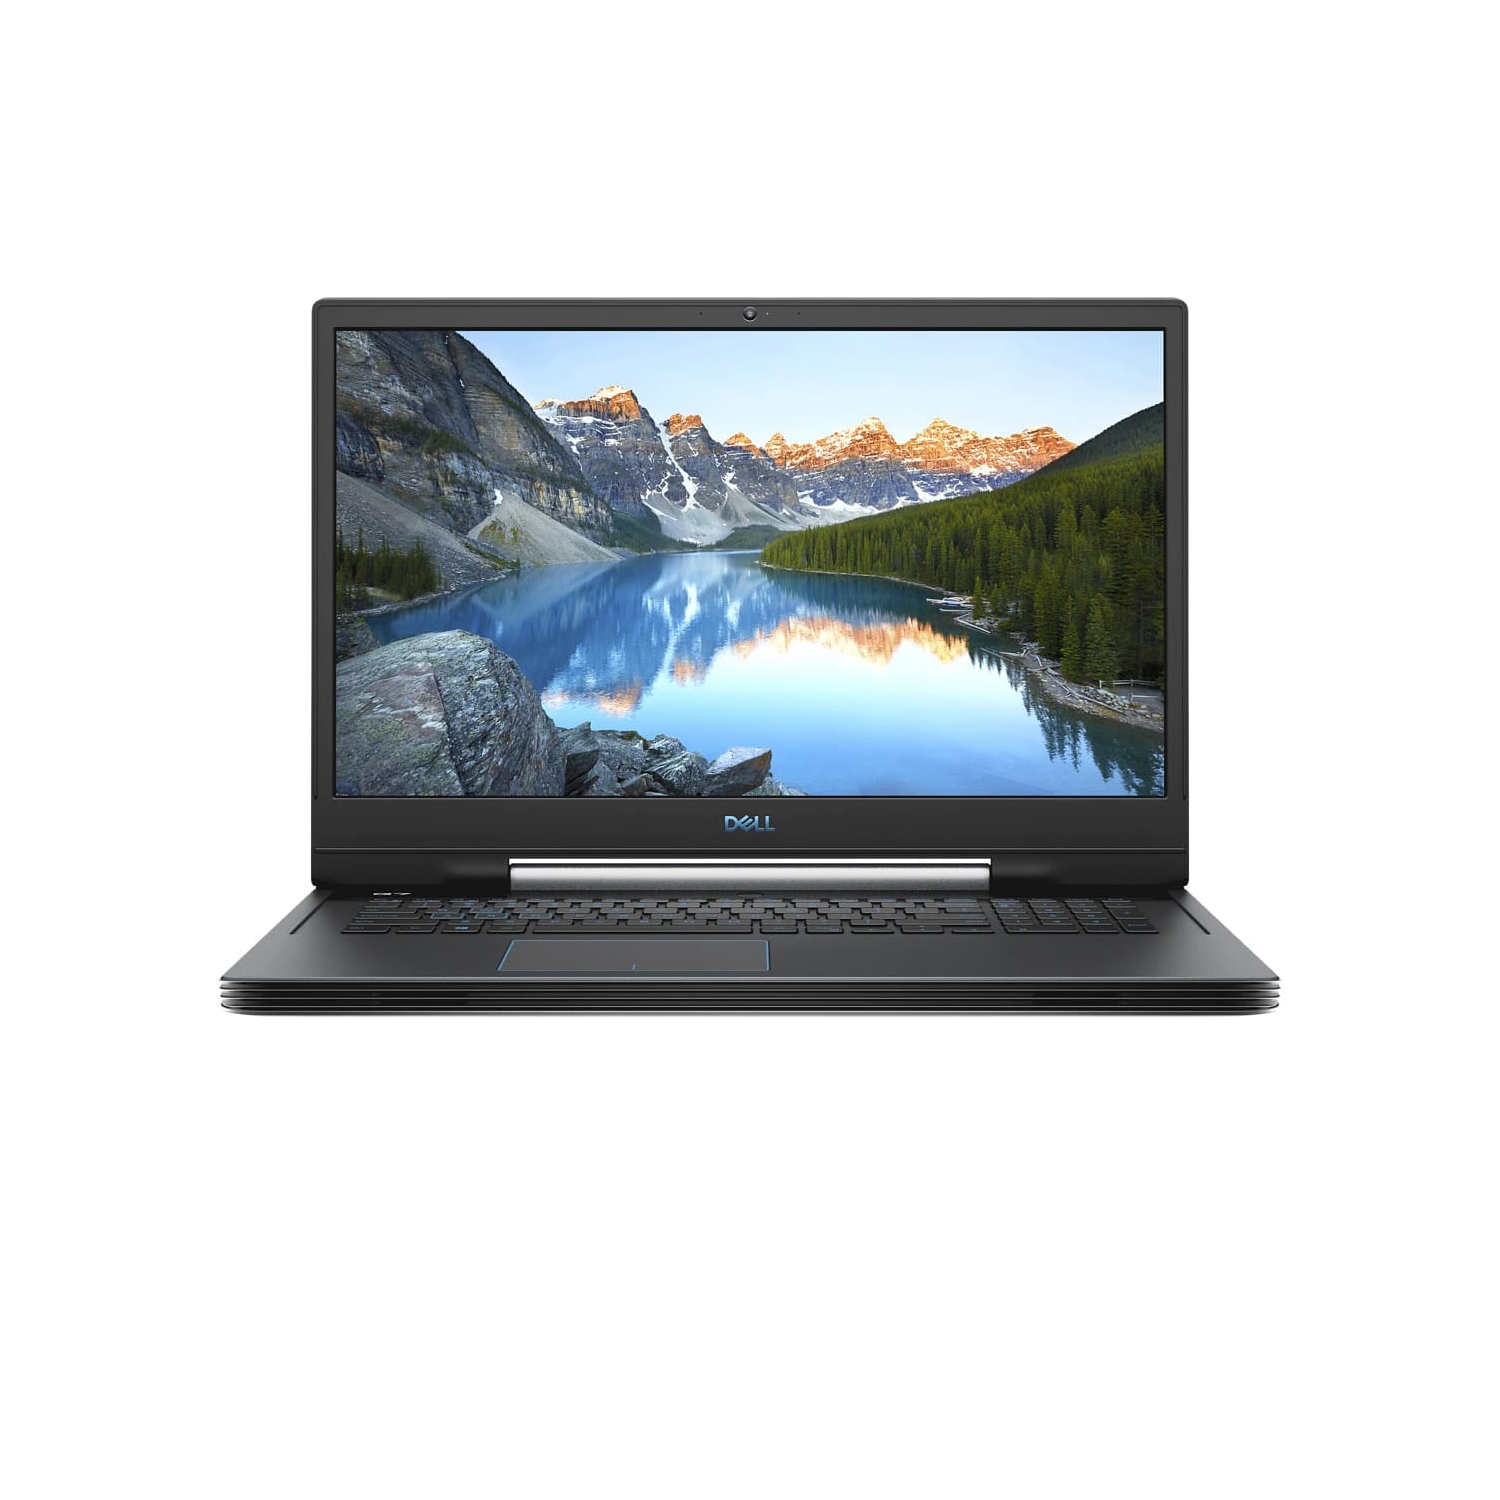 Refurbished (Excellent) – Dell G7 7790 Gaming Laptop (2019) | 17.3" FHD | Core i7 - 512GB SSD - 16GB RAM - RTX 2060 | 6 Cores @ 4.5 GHz - 6GB GDDR6